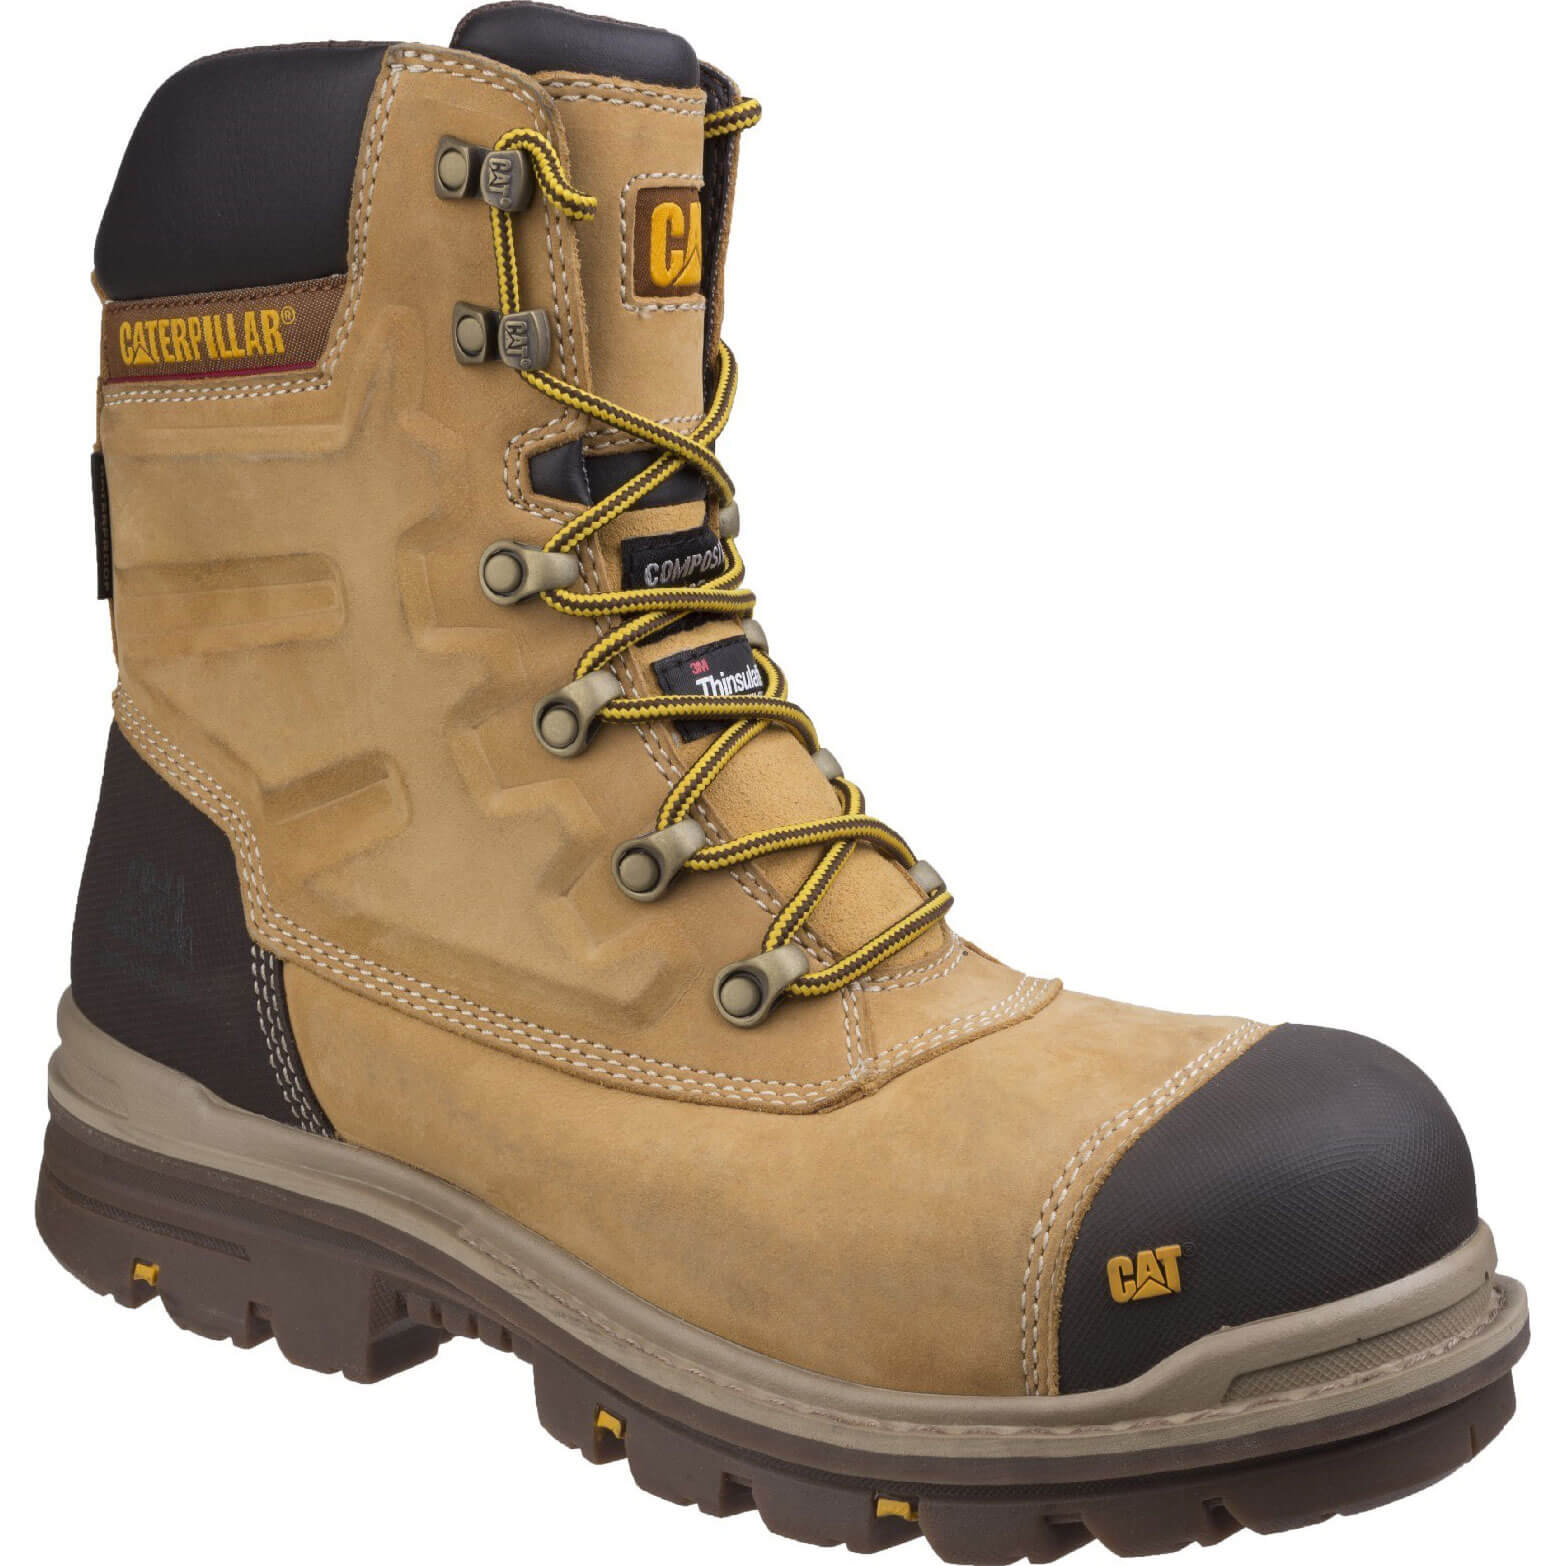 Image of Caterpillar Mens Premier Waterproof Safety Boots Honey Size 8